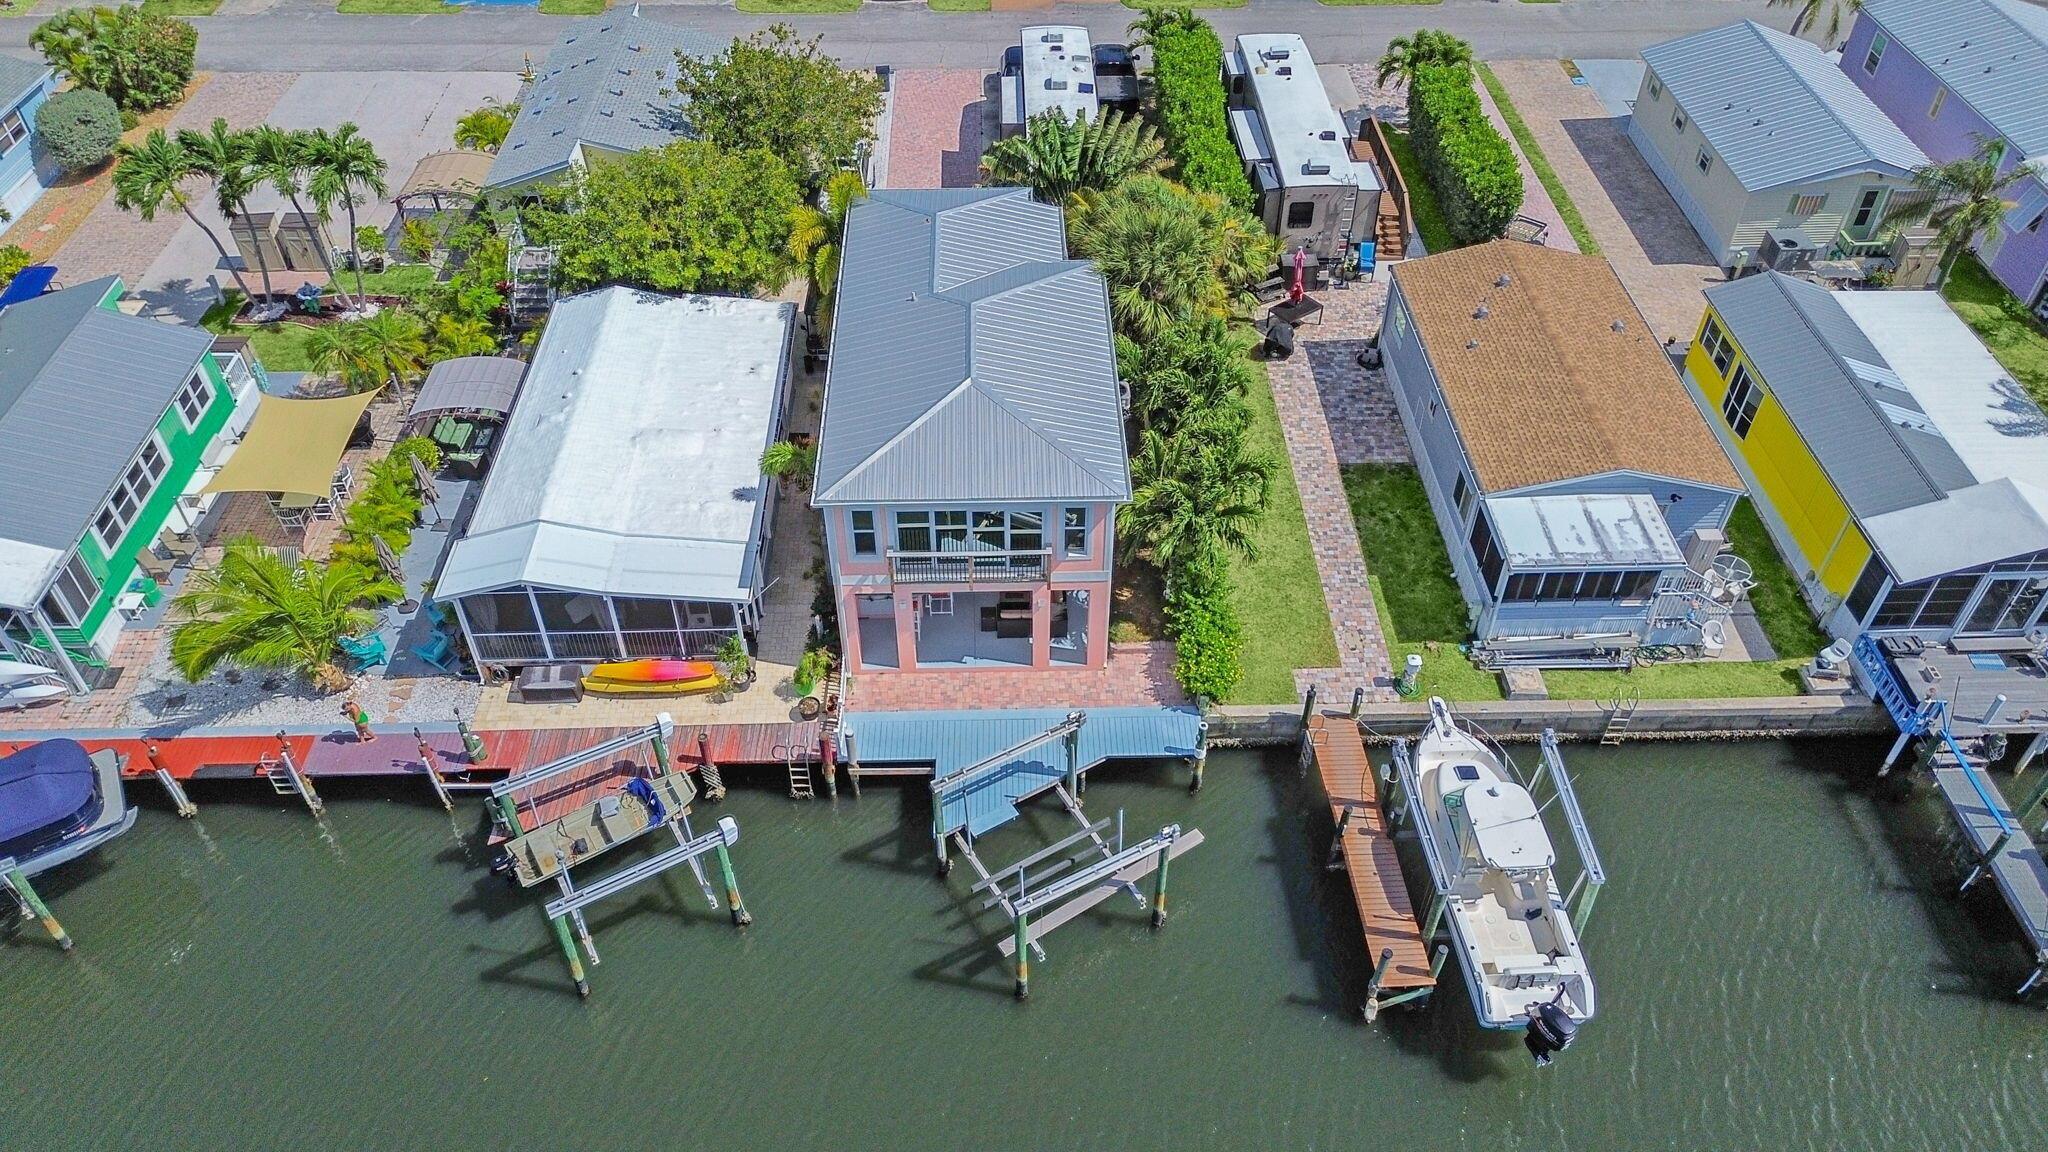 CUSTOM BUILT NEWER CBS WATERFRONT HOME!  KEY WEST STYLE LIVING ON HUTCHINSON ISLAND! Built in 2022 with impact windows and metal roof. This property boasts 30ft. of waterfront just shy of the intracoastal with a 10,000lb Neptune boat lift capable of up to a 30 foot boat. Huge lanai with a bar, refrigerator, sink, and even an outdoor bamboo shower. Well appointed kitchen with convection microwave and oven, dishwasher and induction cooktop. Tastefully appointed bathrooms featuring a rain shower in both and a double sink vanity in primary. This community offers a waterfront paradise with boating, community pool, beach access, and boat launch. Come experience the Florida lifestyle on Hutchinson Island featuring beautiful sunsets from the lanai, sunny beaches, nature preserves, golf, museums,